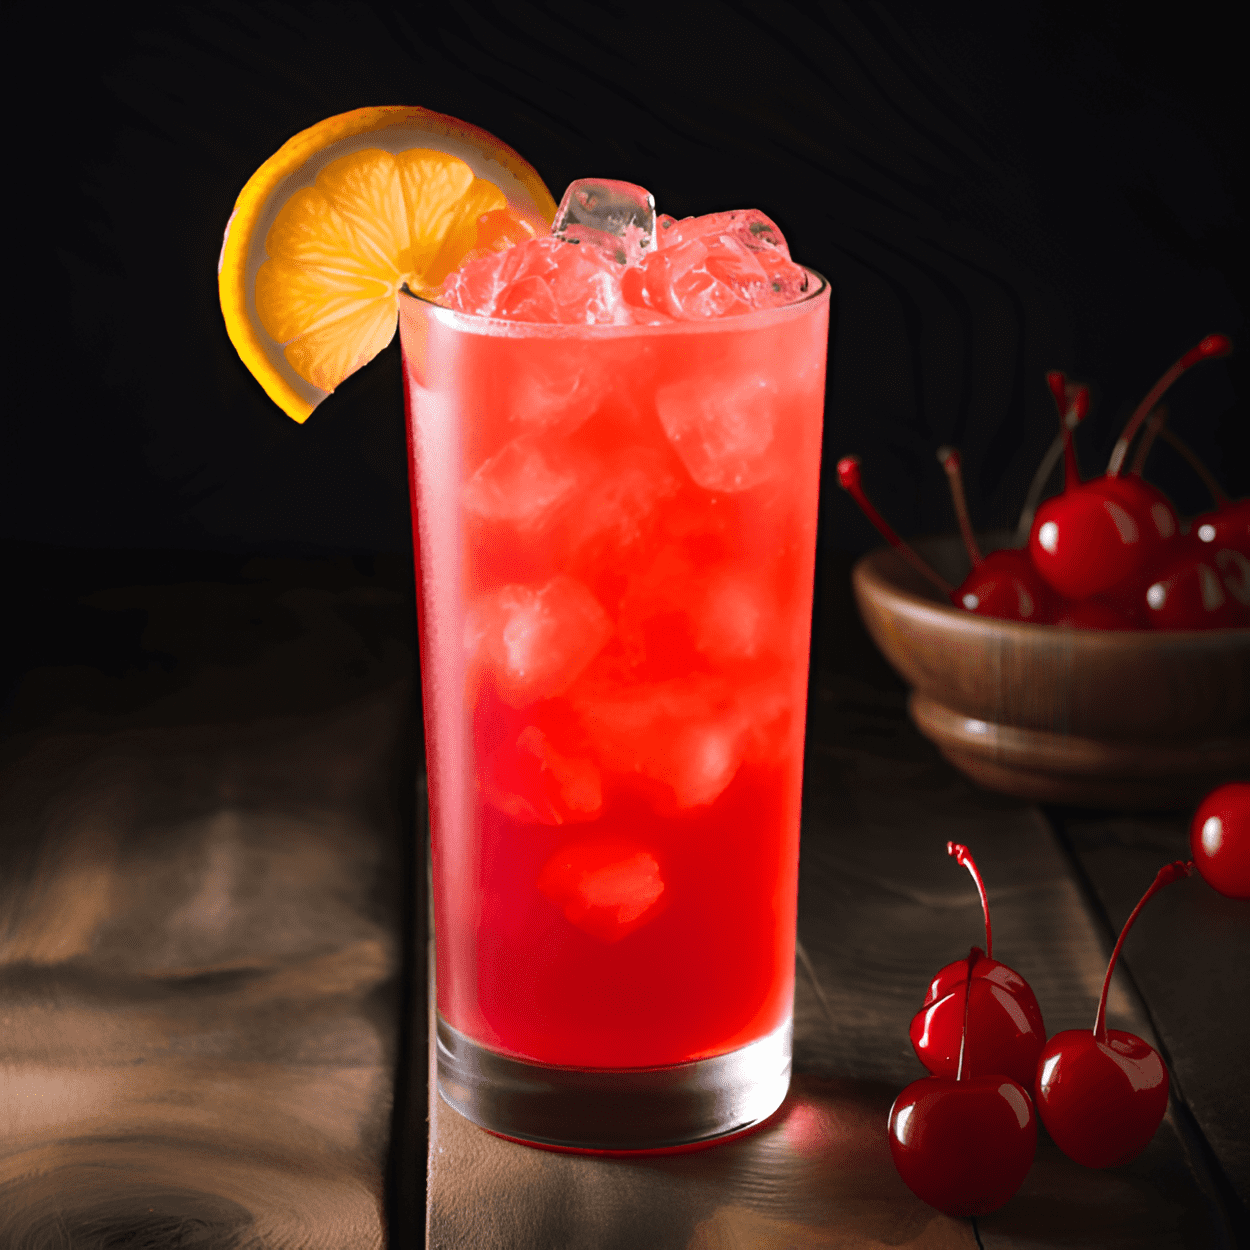 Freddy Kruger Cocktail Recipe - The Freddy Kruger cocktail is a delightful mix of sweet and sour, with a strong kick from the vodka. The pineapple juice gives it a tropical twist, while the grenadine adds a hint of tartness. The overall taste is refreshing, fruity, and slightly tangy.